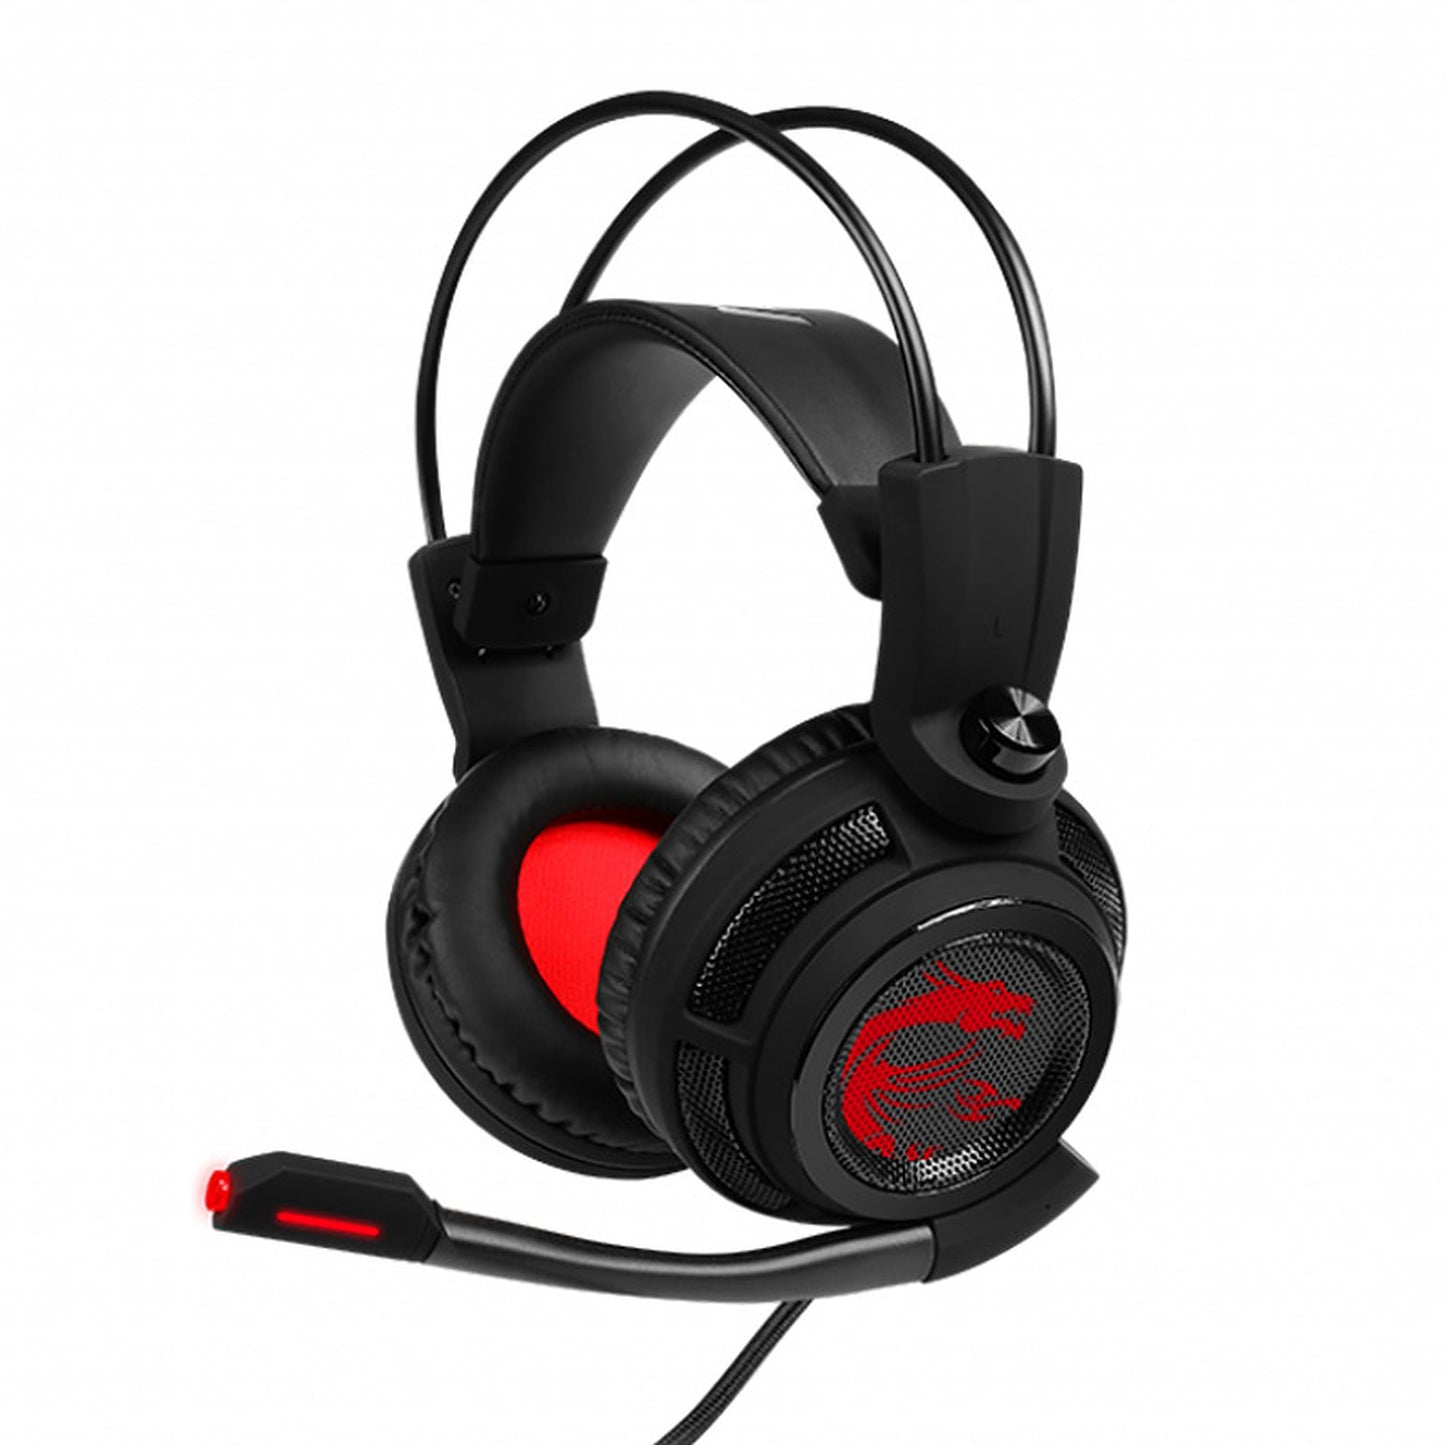 MSI HEADSET GAMING DS502, VIRTUAL 7.1 SURROUND, USB IN-LINE CONTROLLER, RETRACTABLE MICROPHONE, [S37-0400100-SV1]